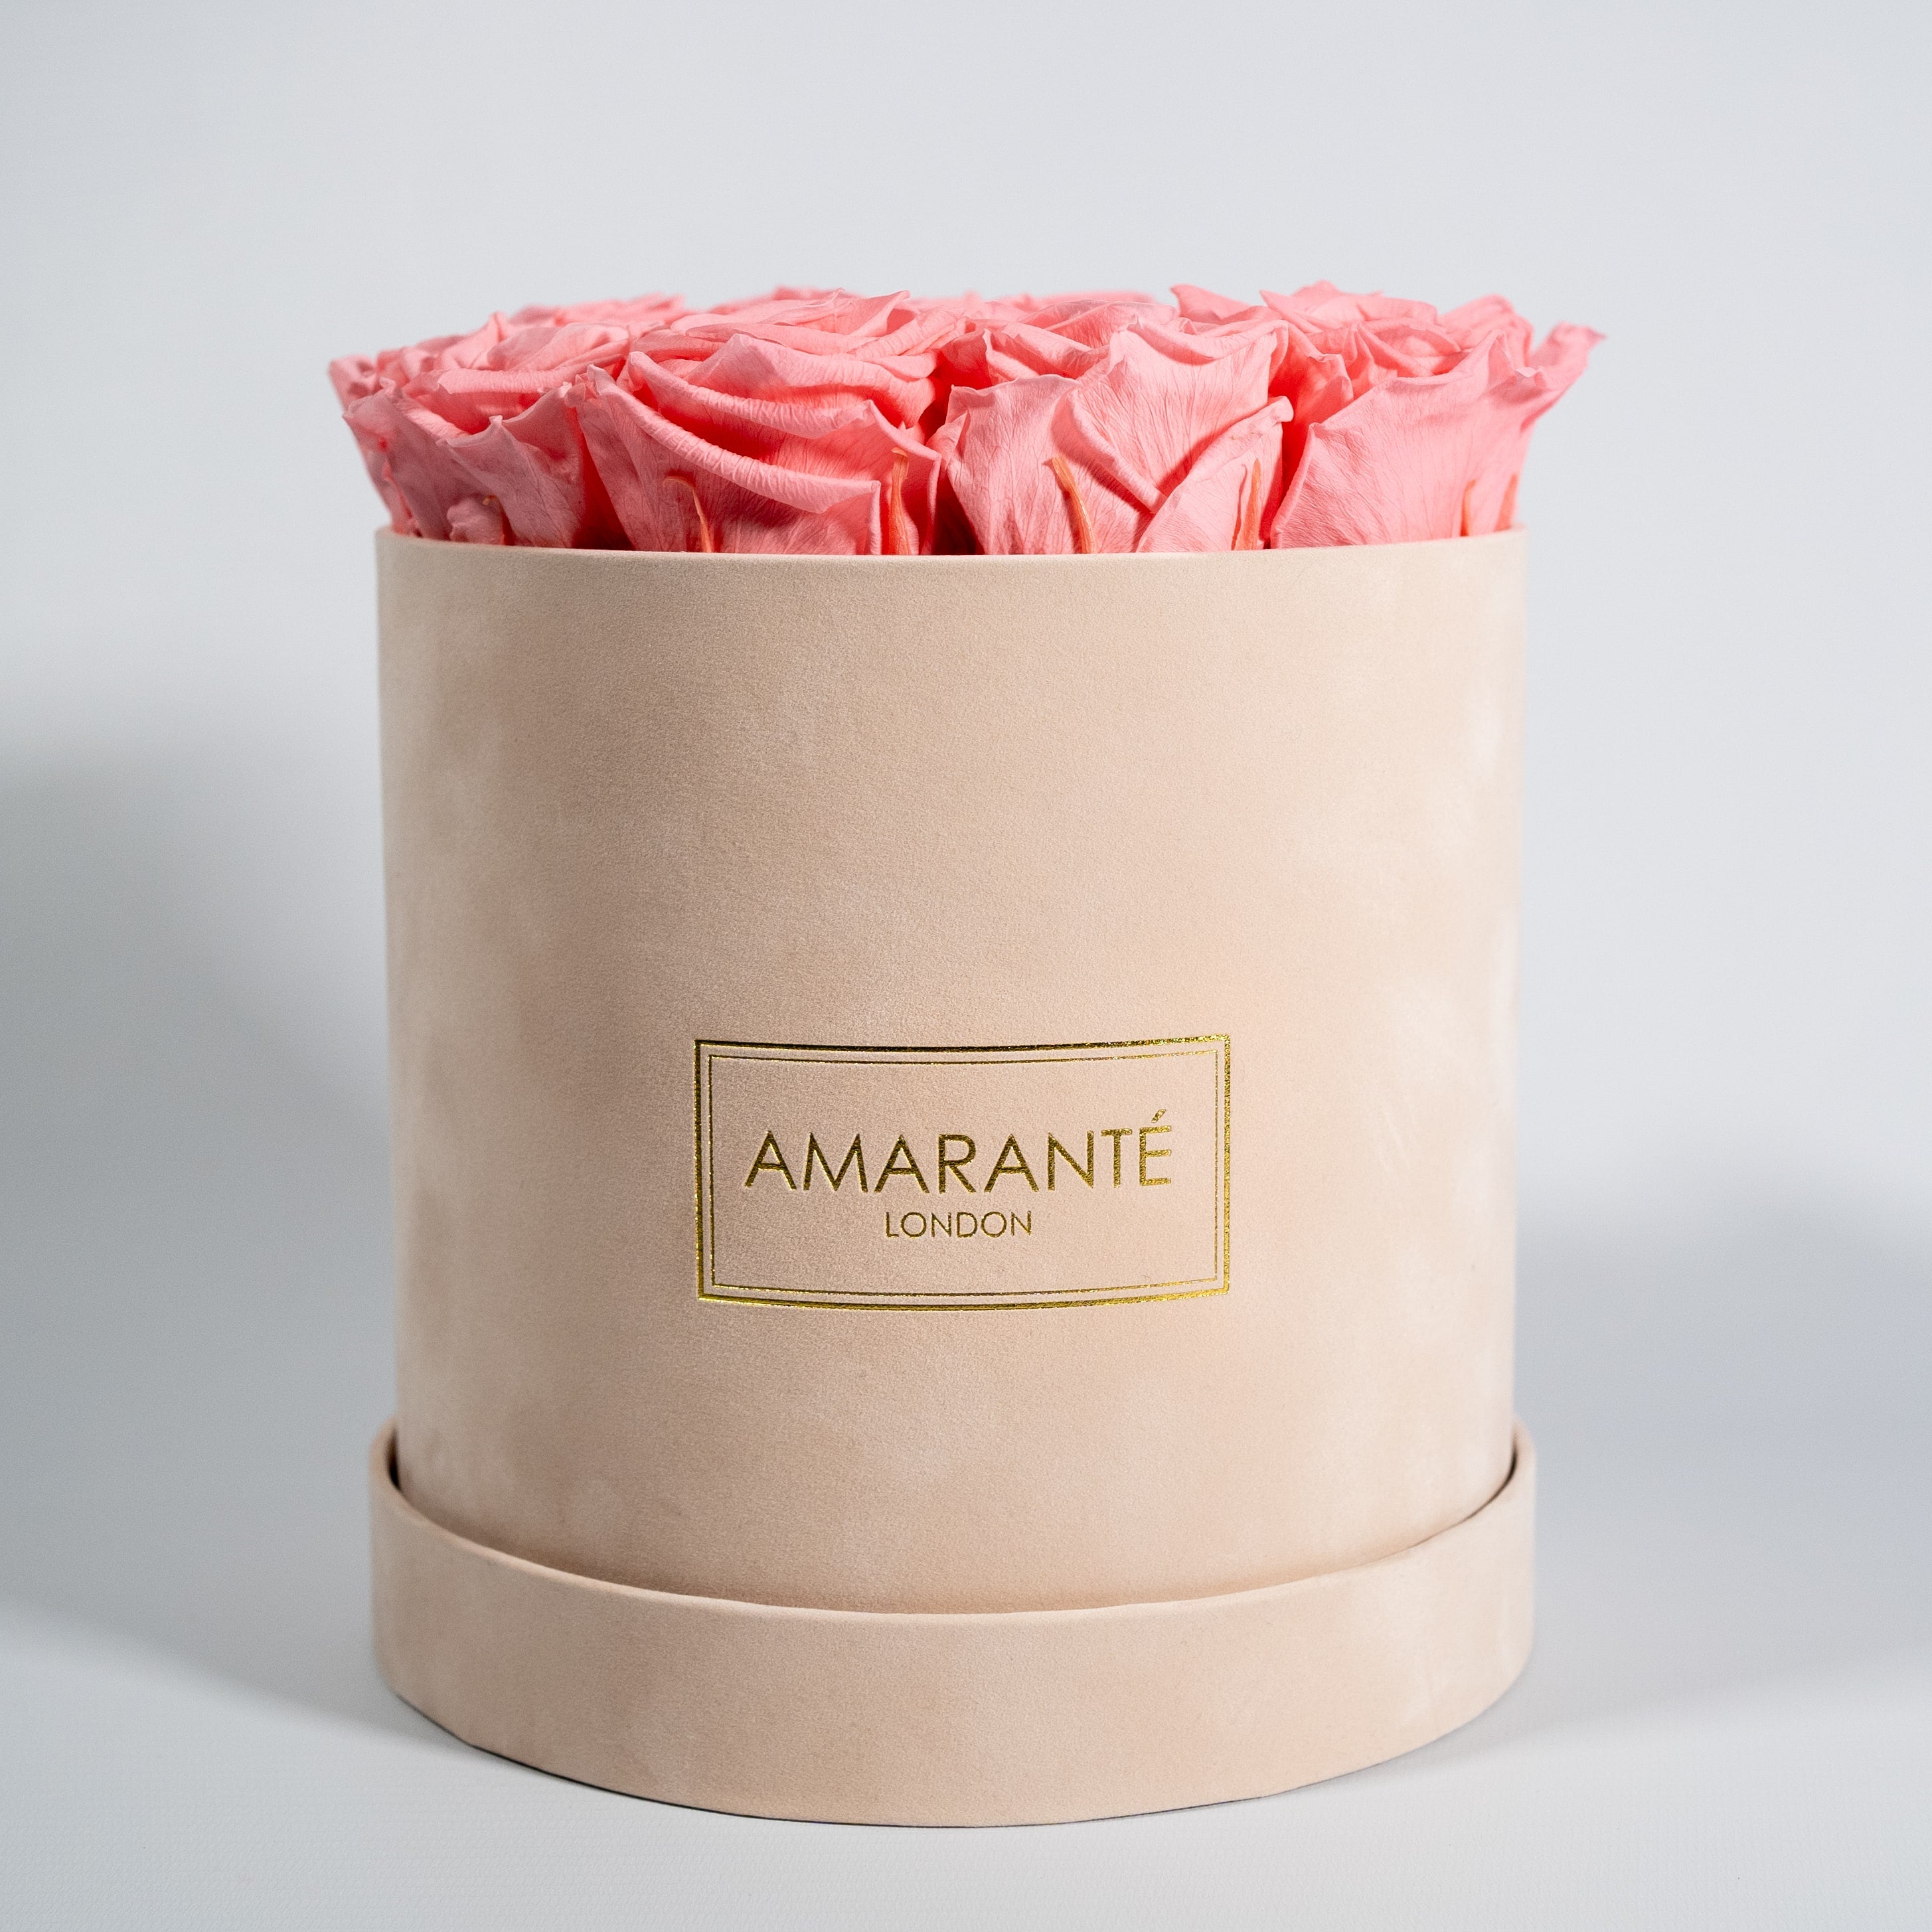 Aromatic light pink roses denoting beauty, love, and romance. 